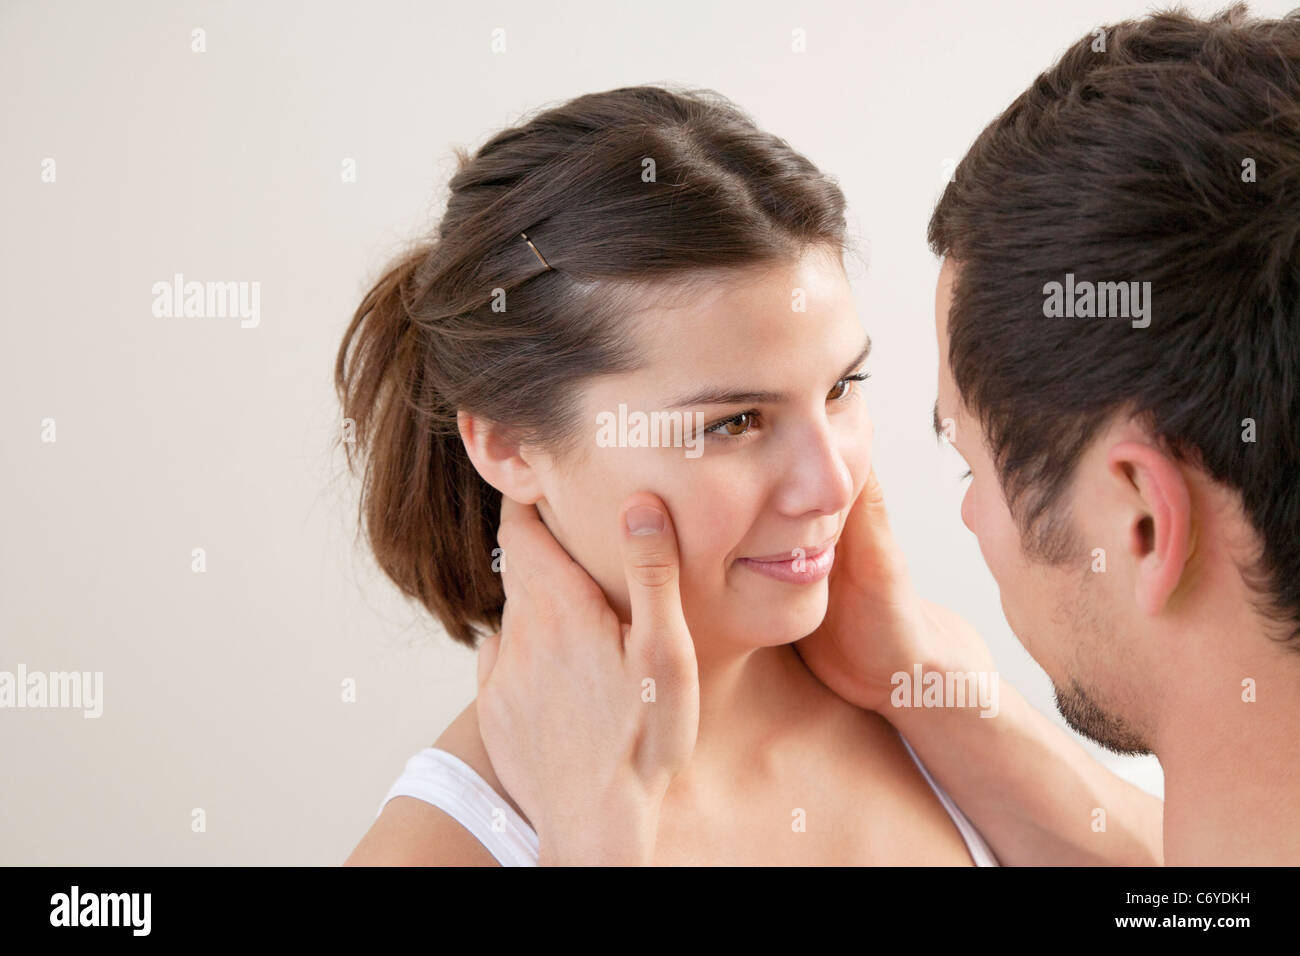 Man holding his Girlfriend's face Banque D'Images